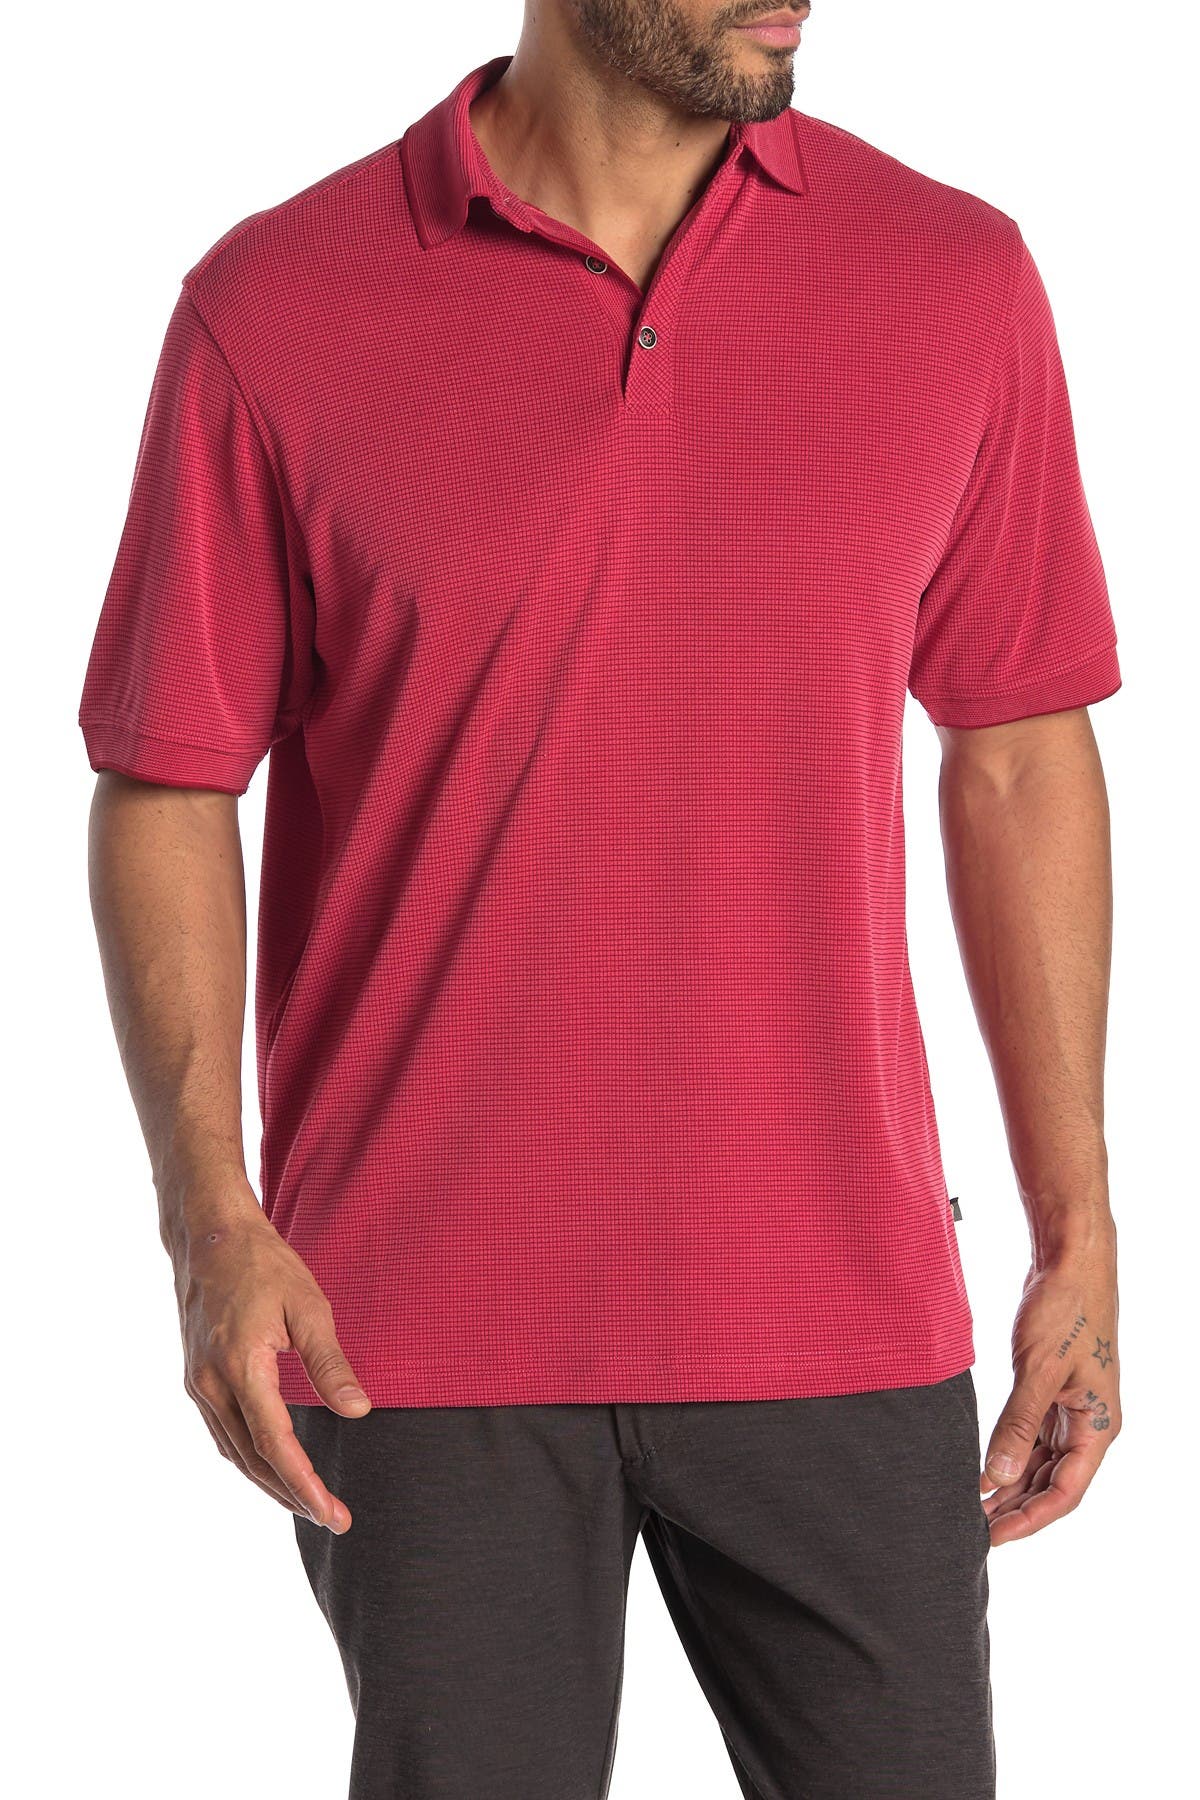 tommy bahama all square polo